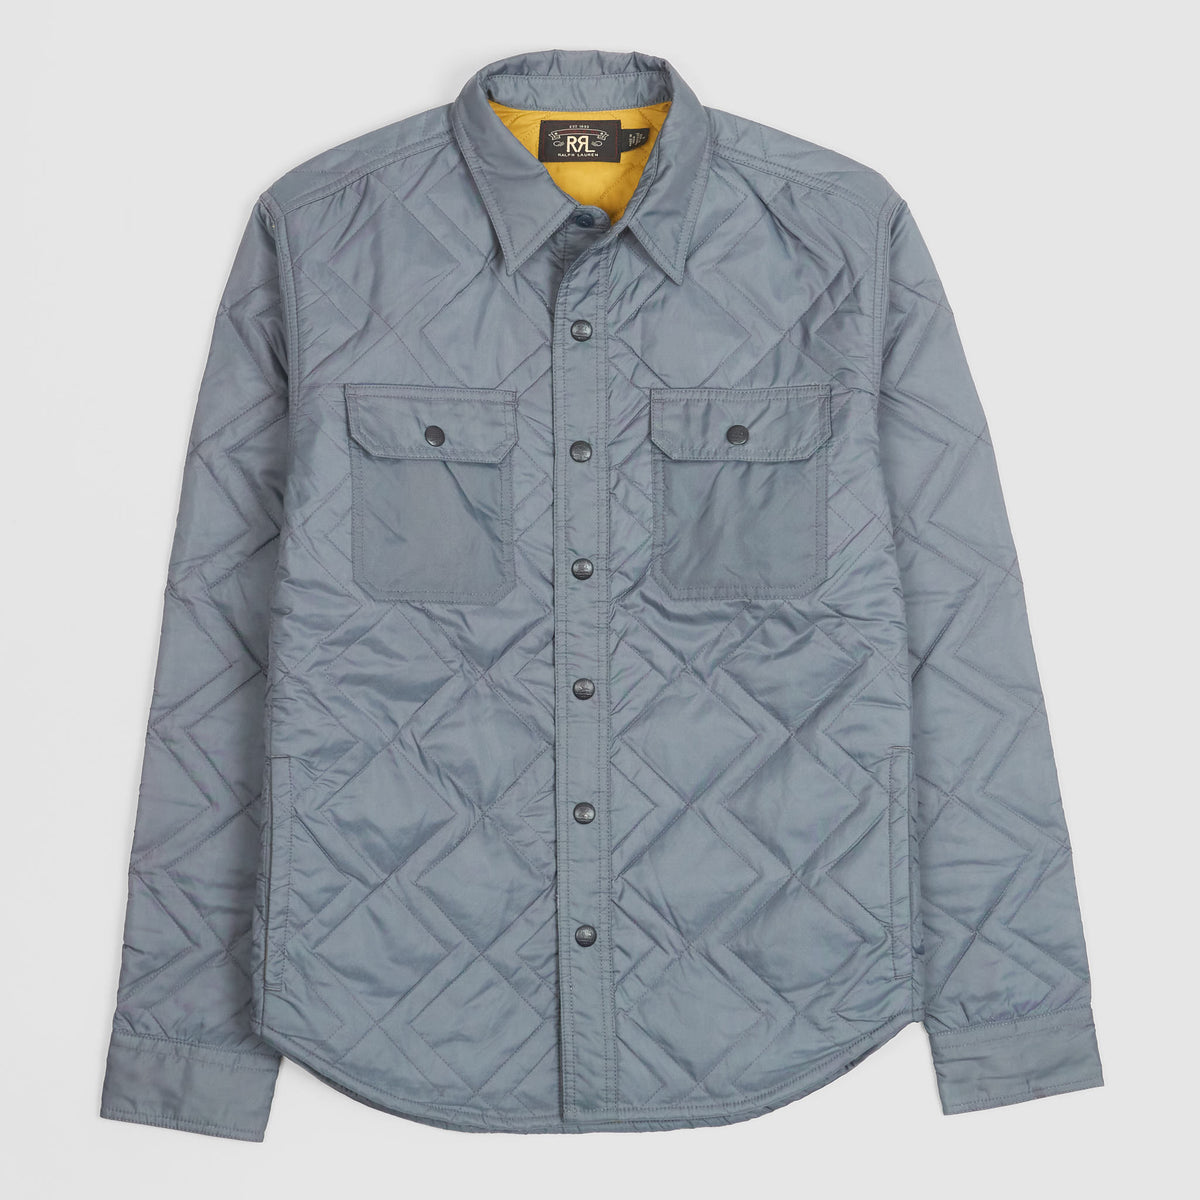 Double RL Quilted CPO Jacket - DeeCee style